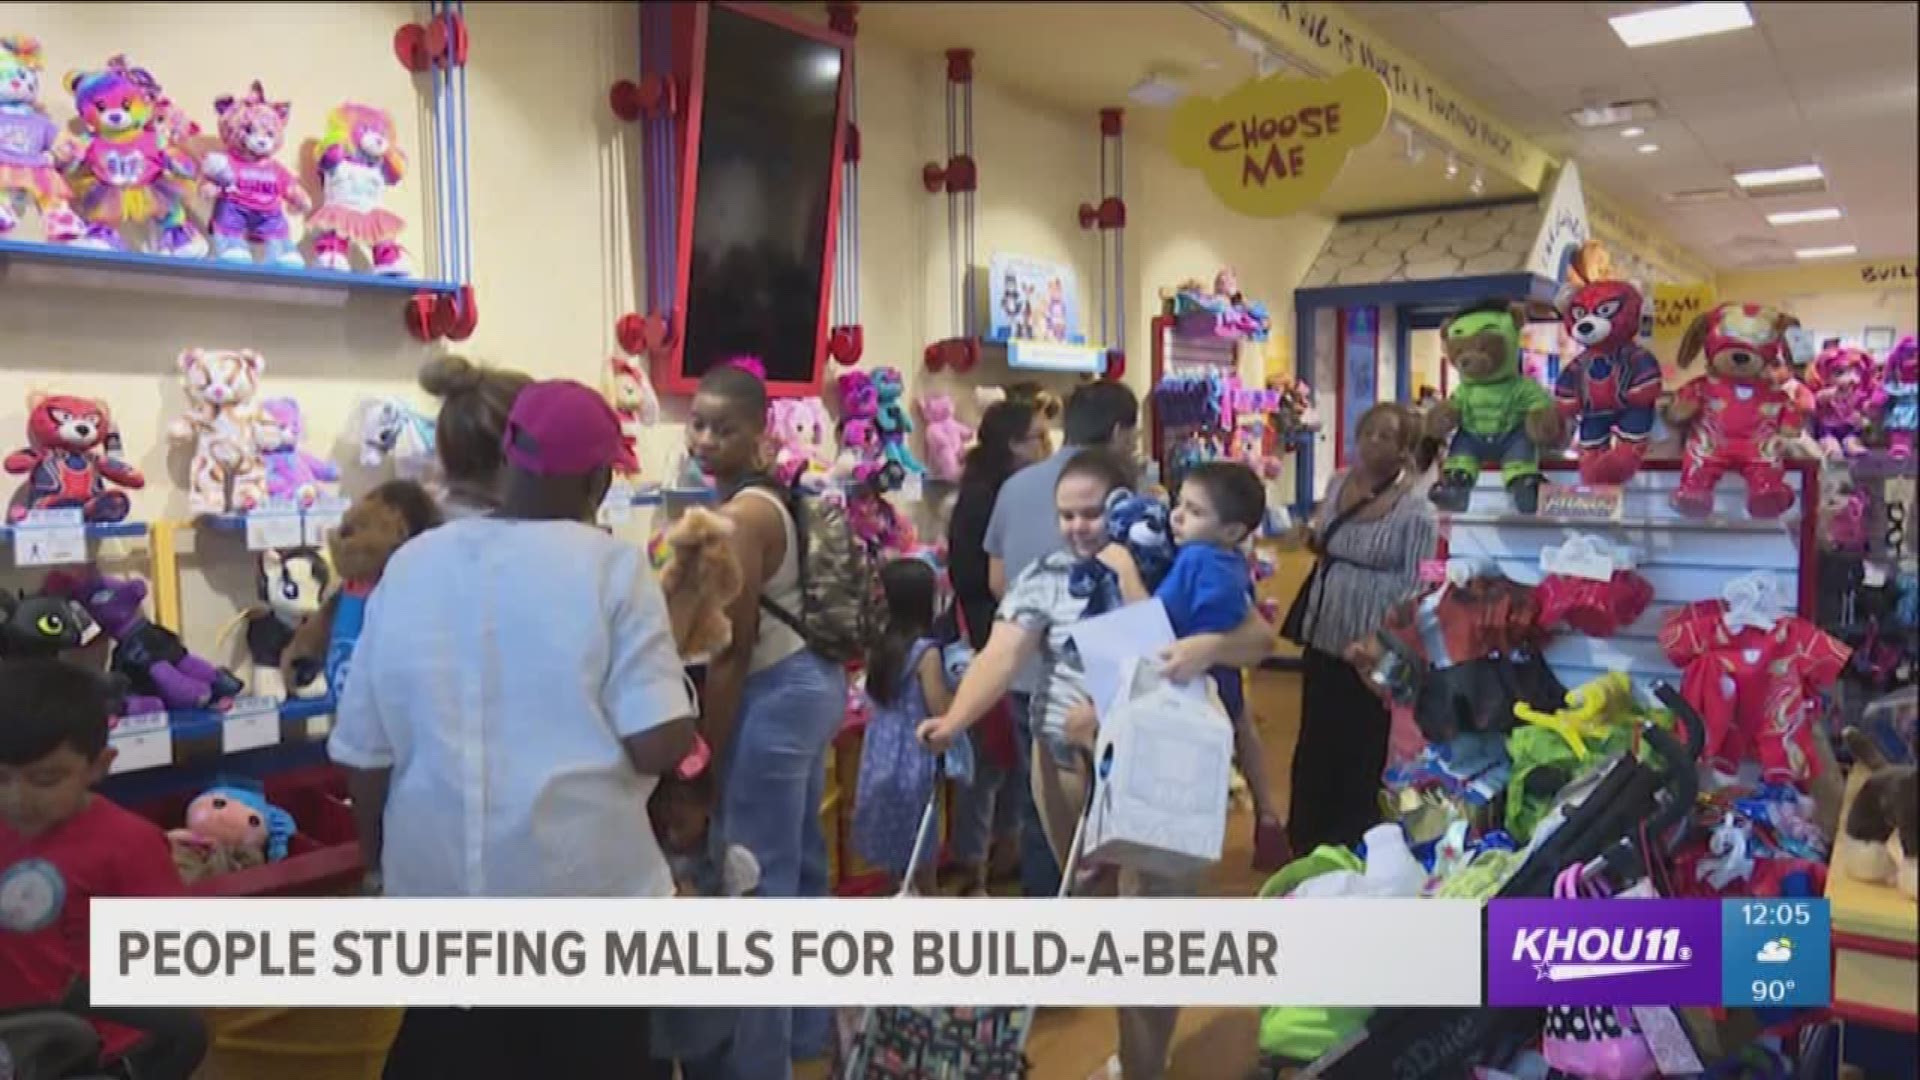 Due to overwhelming response, Build-A-Bear has announced on their website that lines for their Pay Your Age Day Event have been closed.